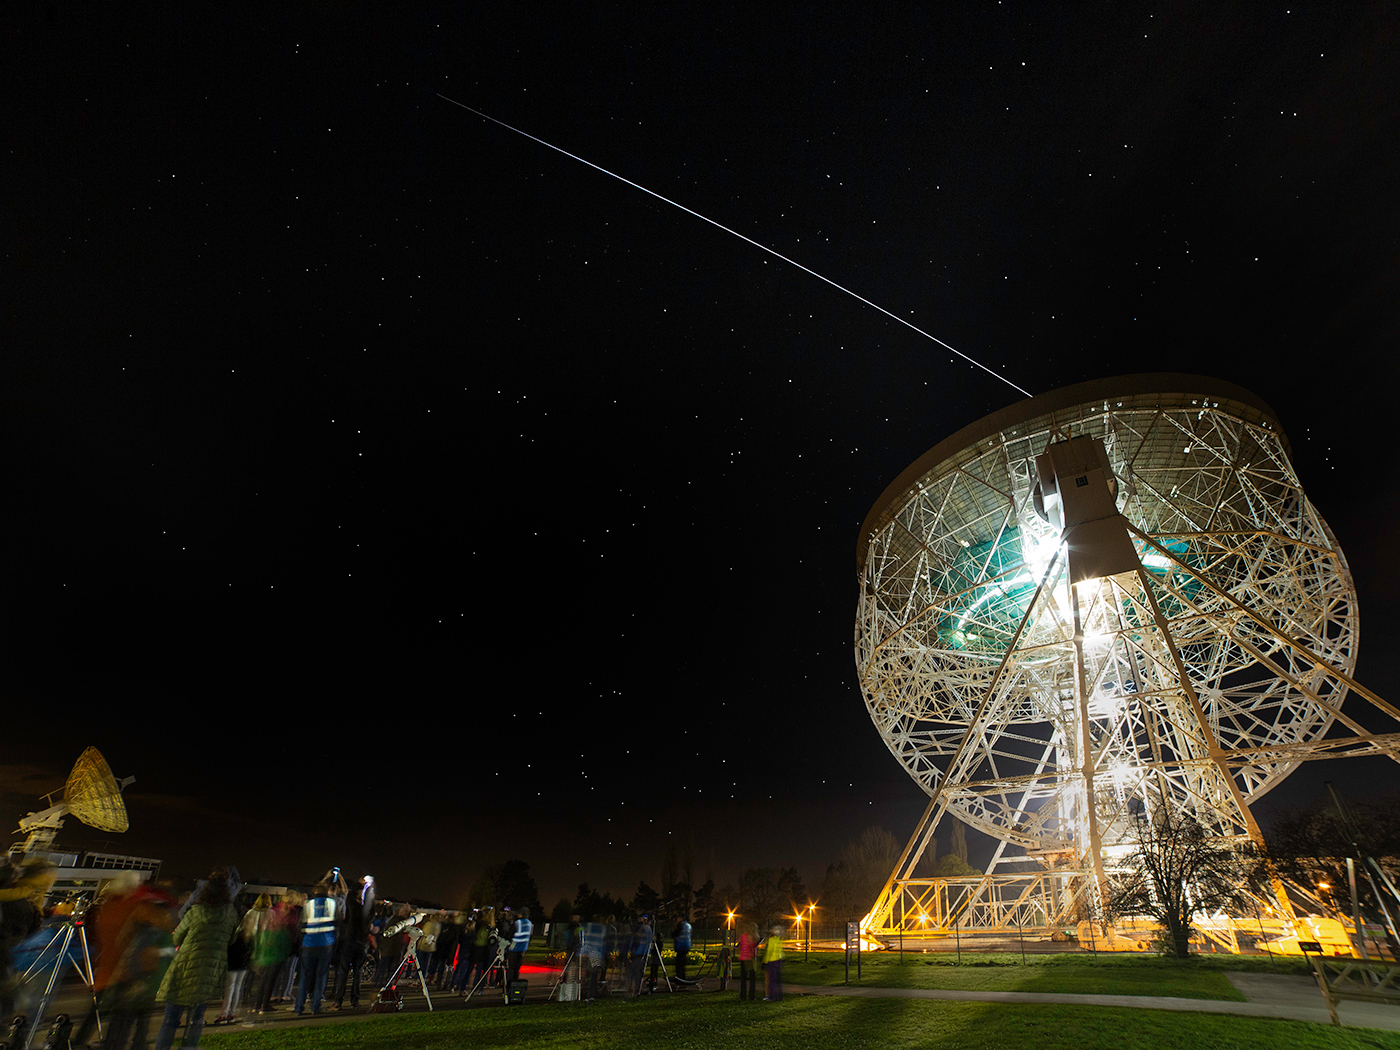 Jodrell Bank and the International Space Station  By David Tolliday